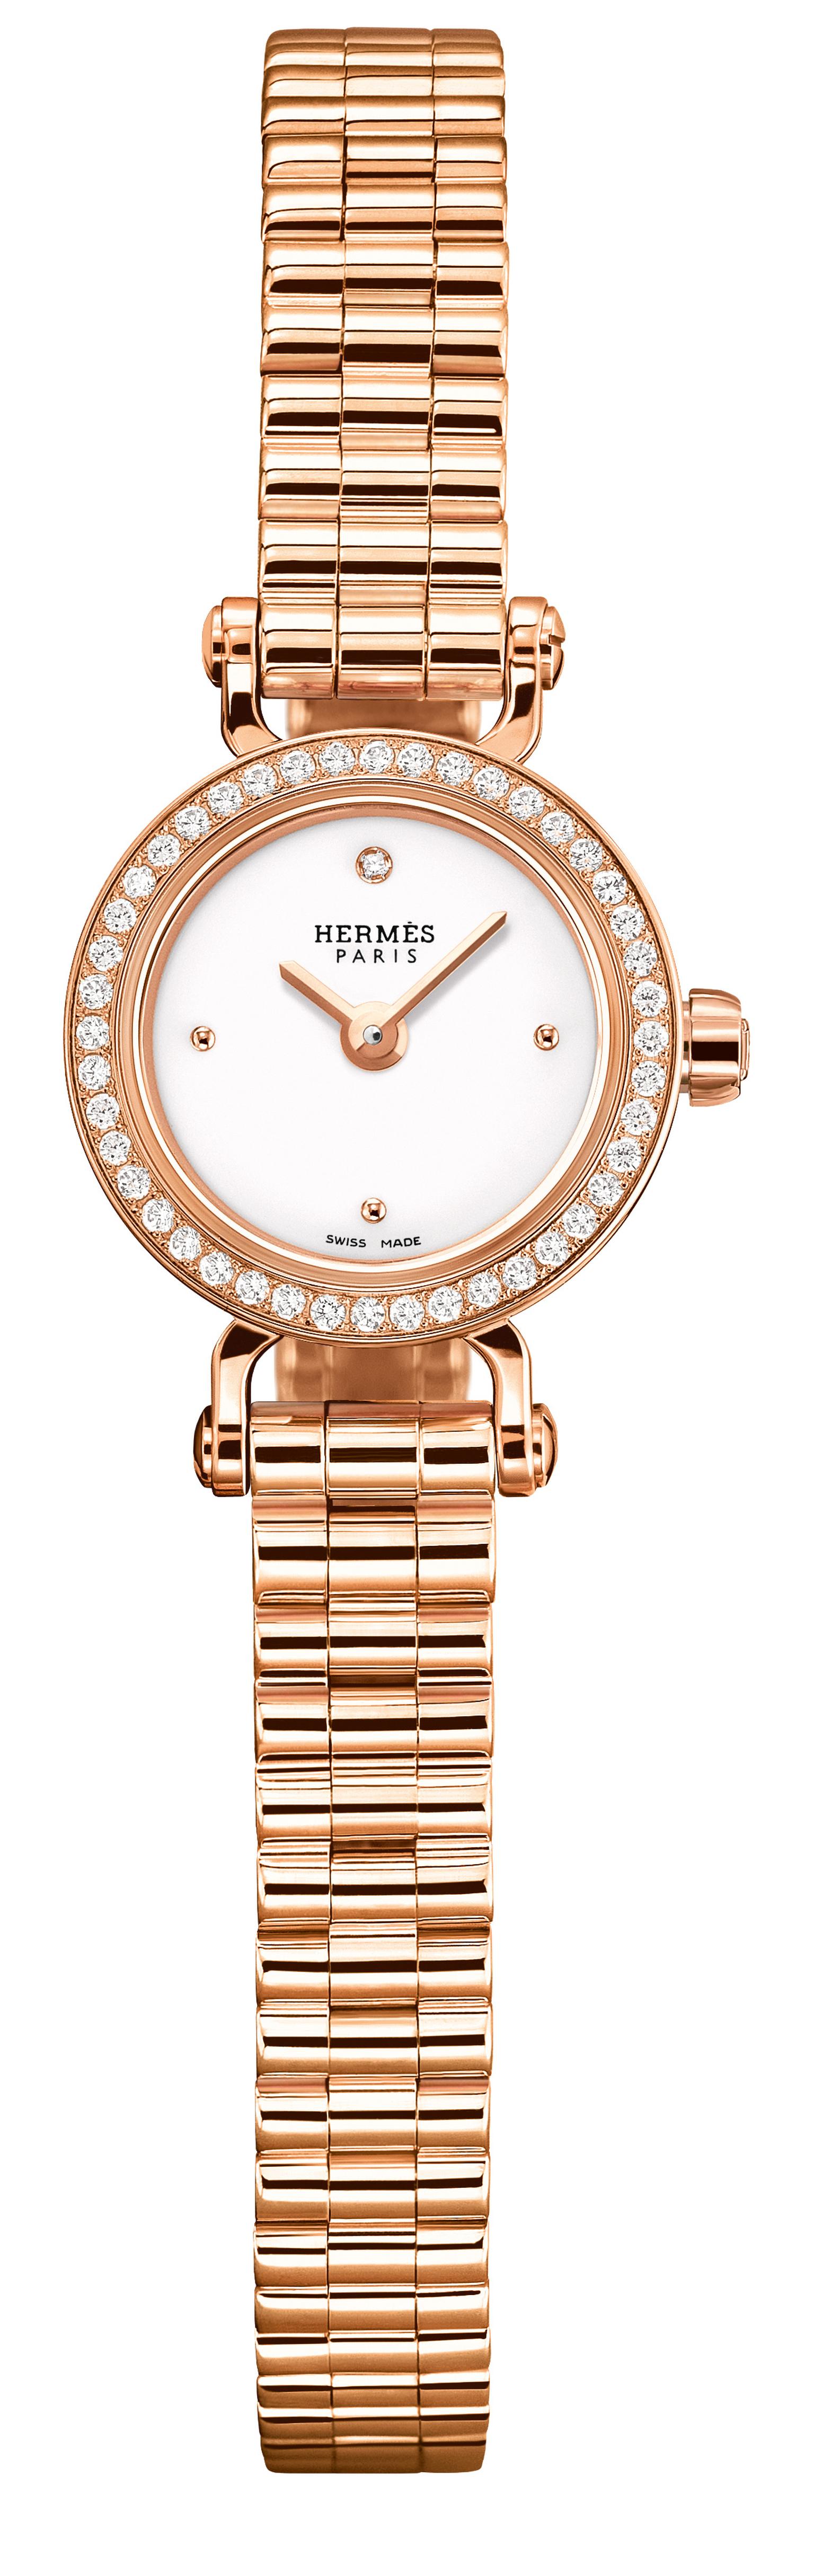 Hermes Faubourg watch in rose gold with diamonds_20140131_Zoom